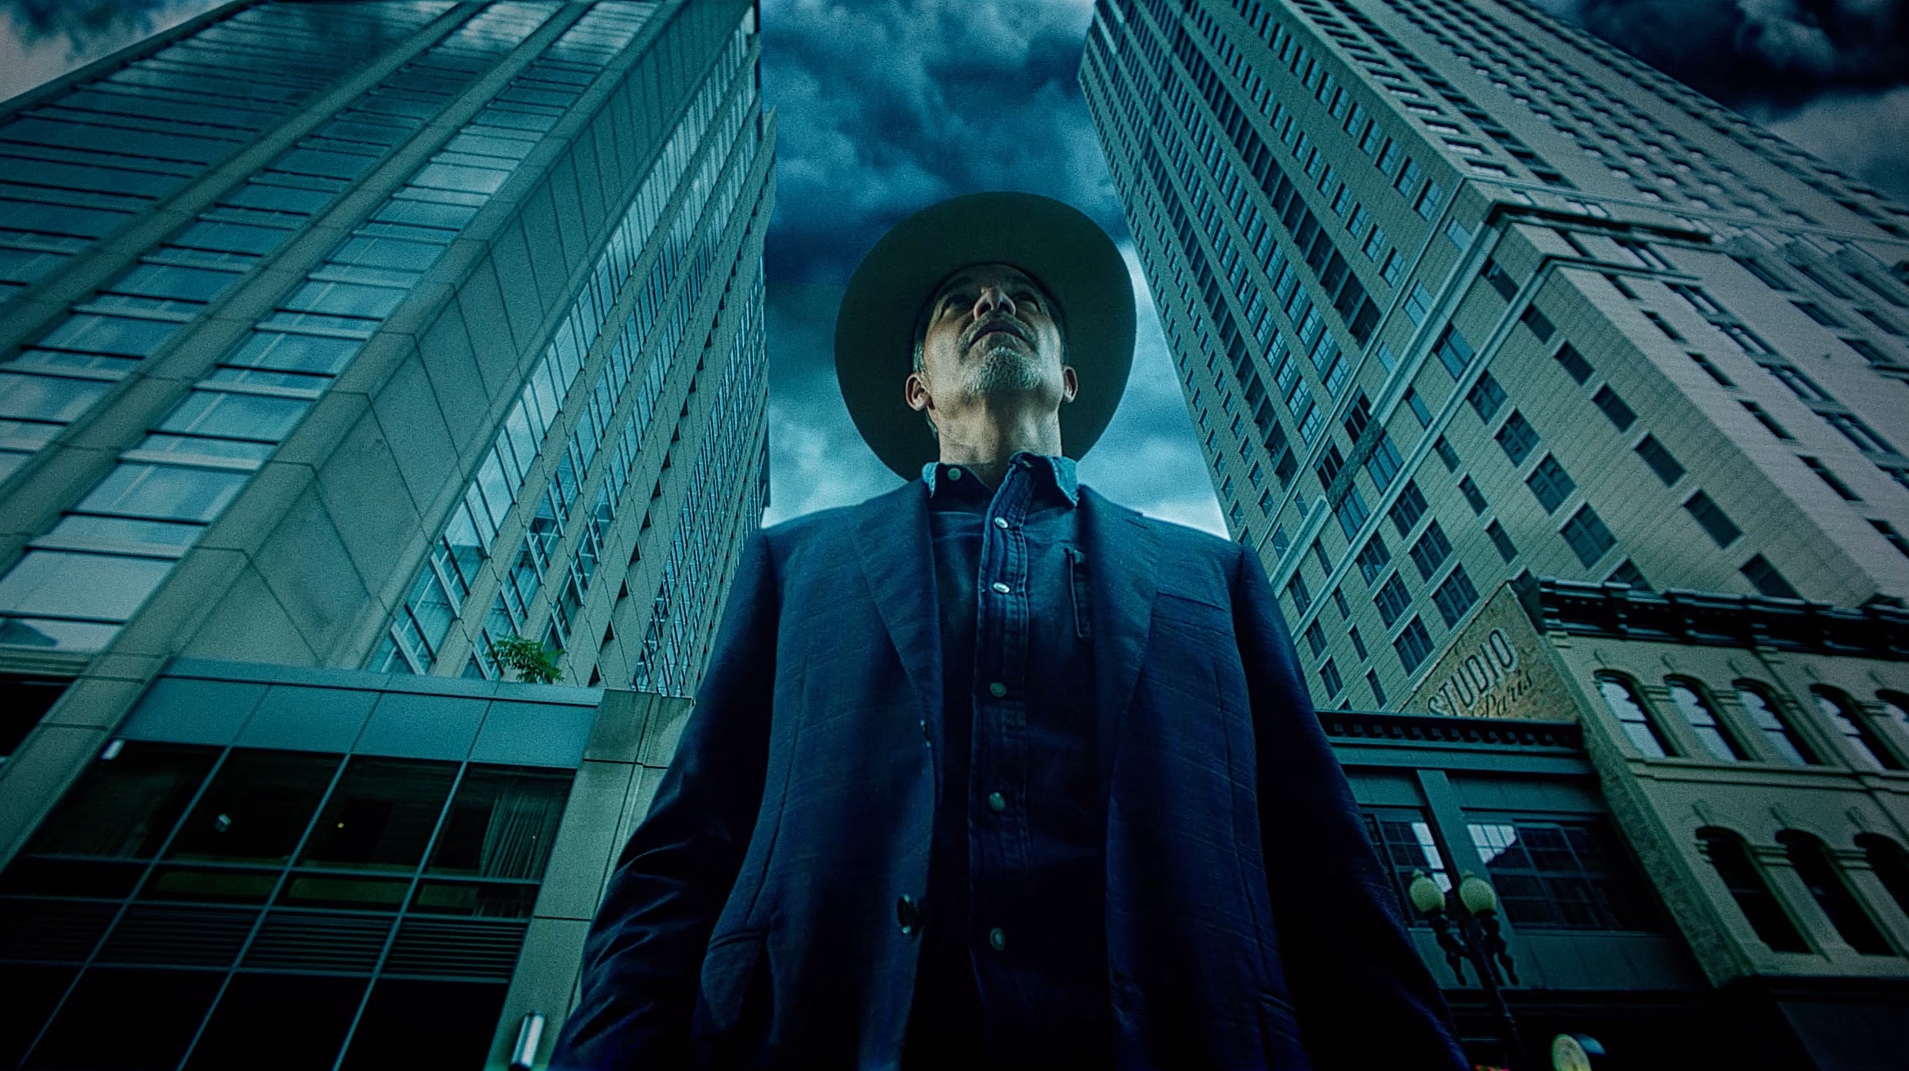 Raylan Givens standing in front of to skyscrapers